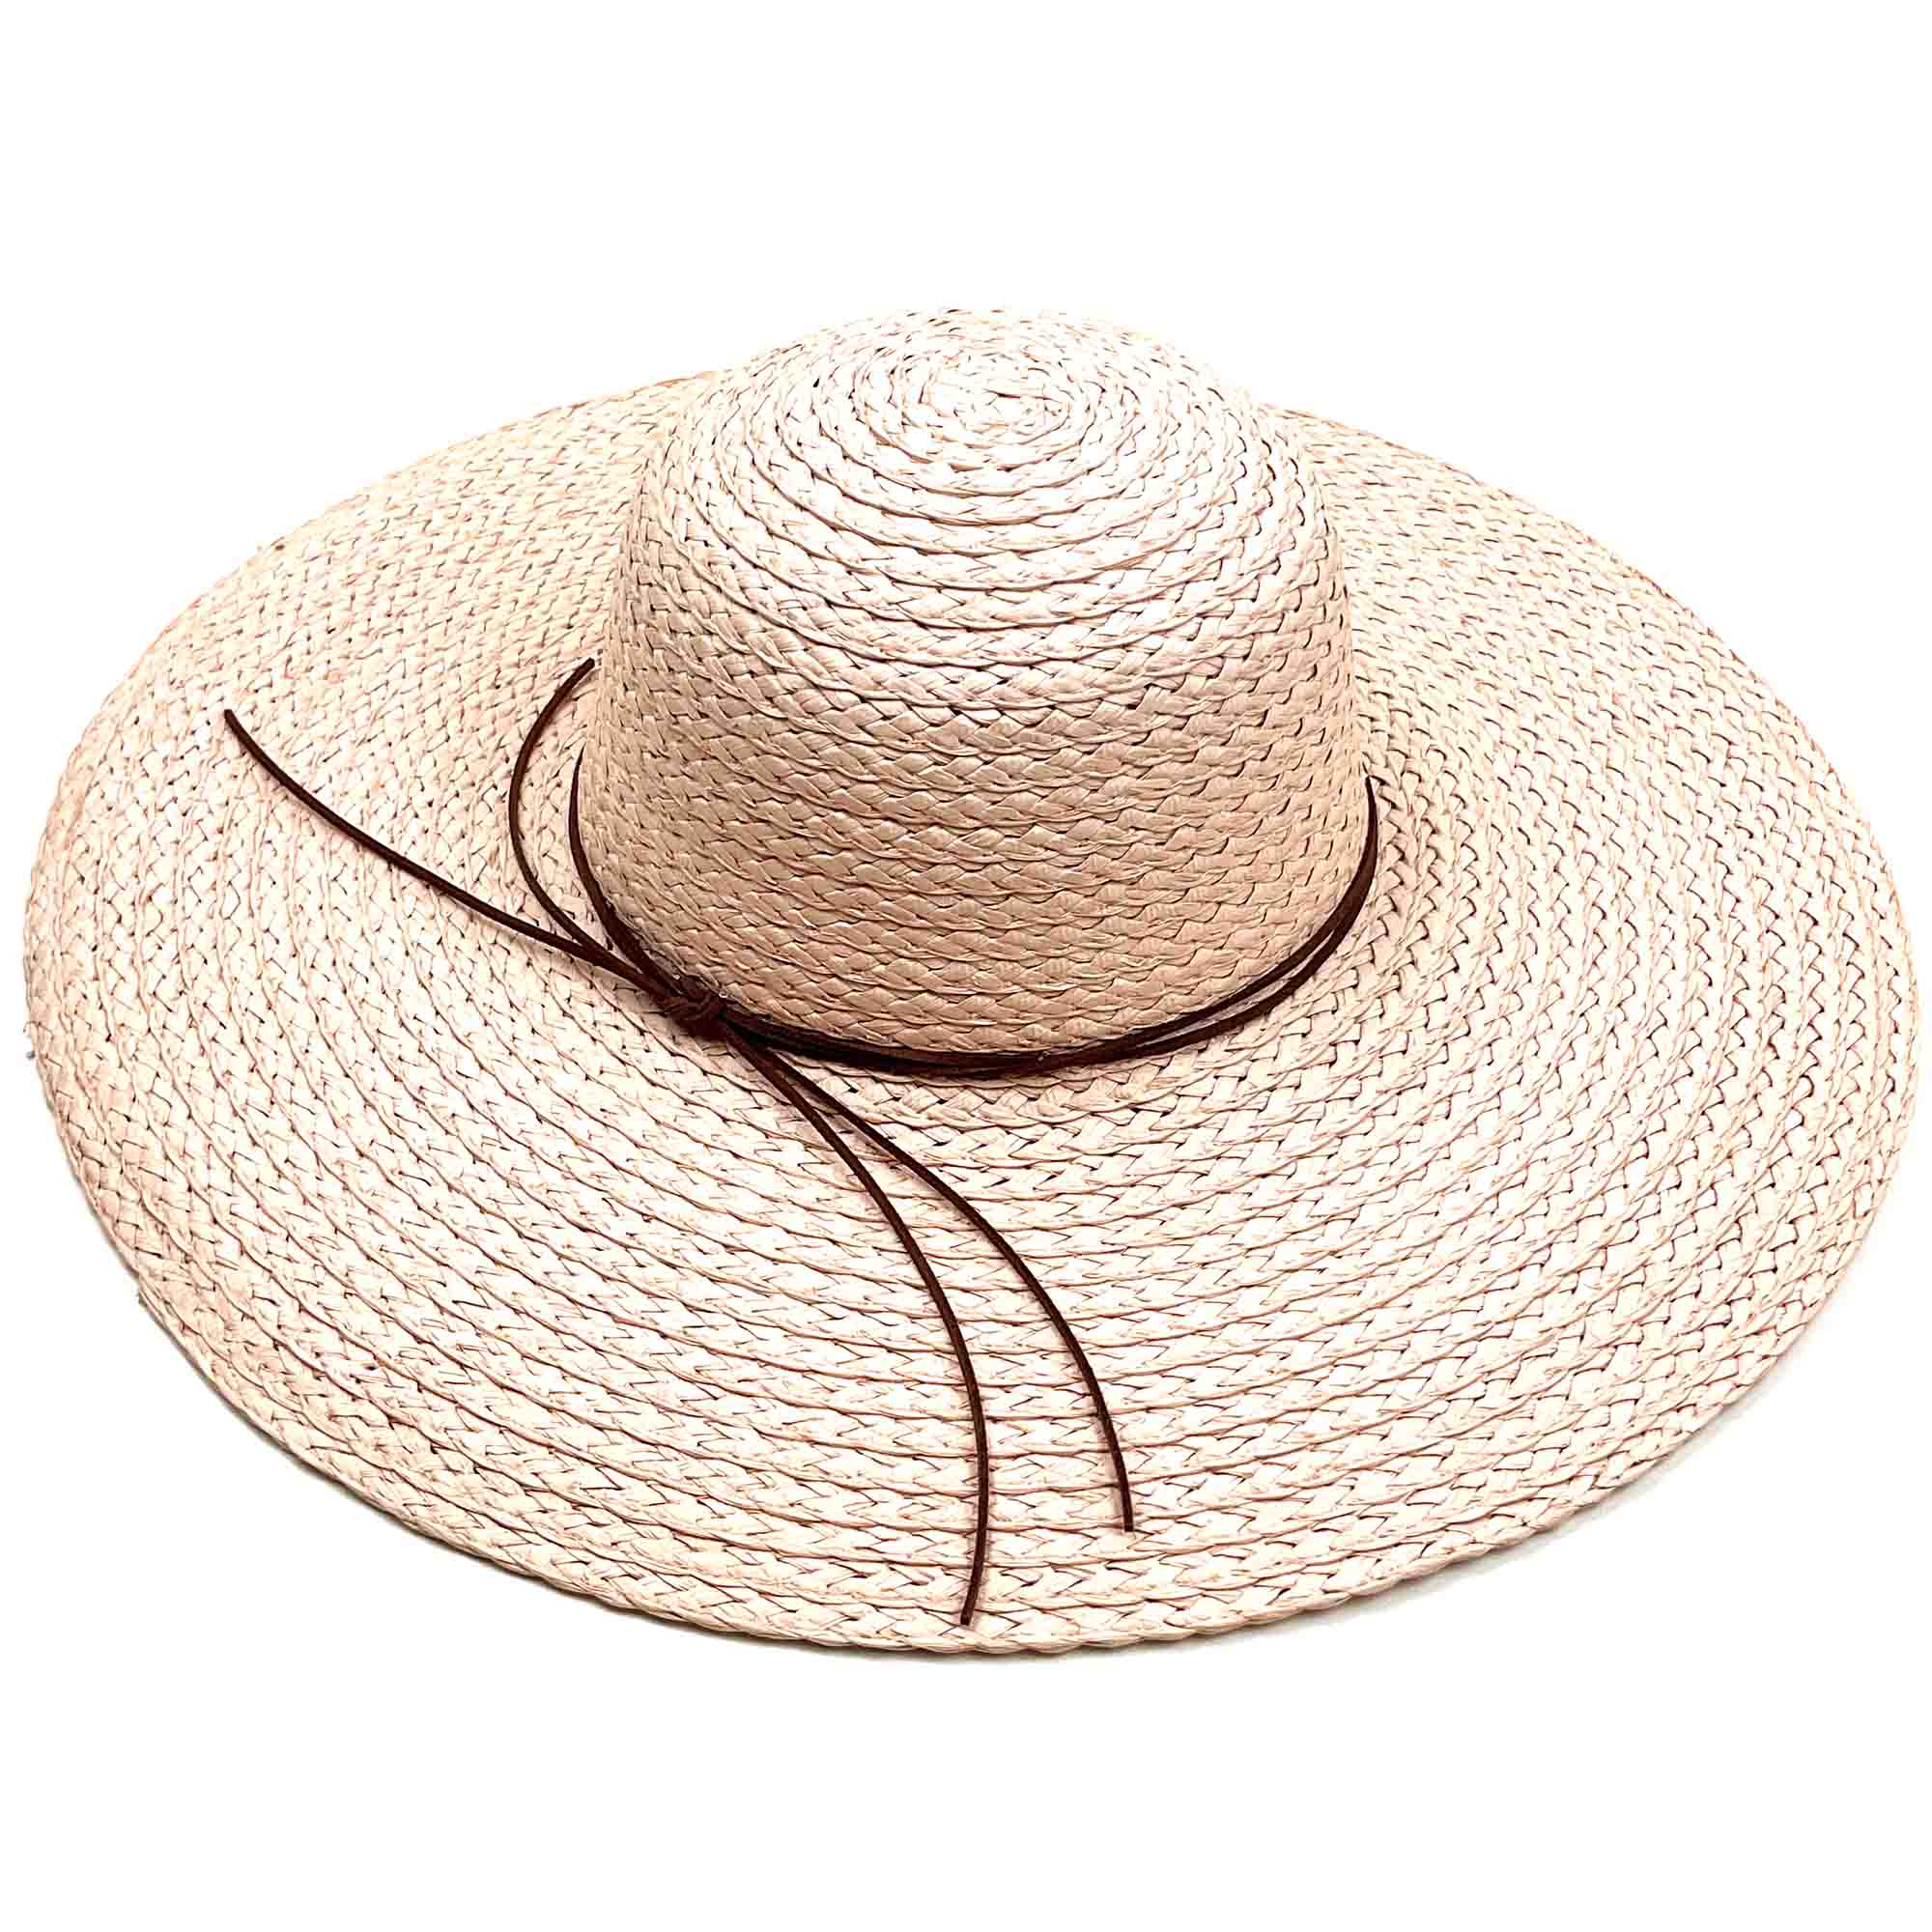 Wide Brim Braided Floppy Beach Hat for Large Heads - Fadivo Hats Wide Brim Sun Hat Fadivo New York CH4510-PIN Pink Large (58.5 cm) 